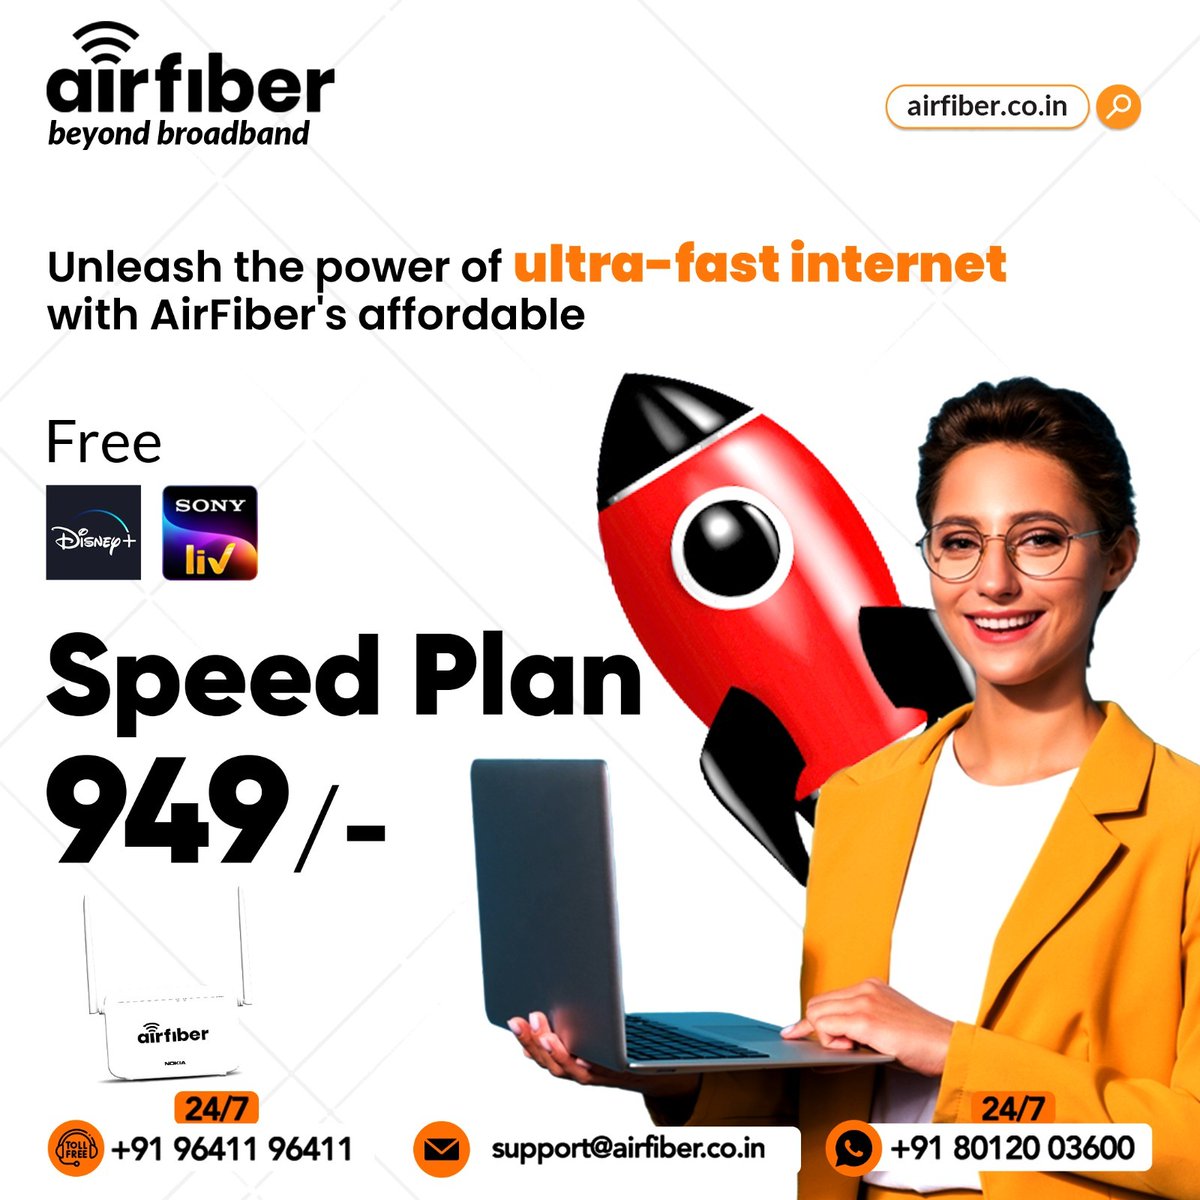 Experience the thrill of seamless streaming and ultra-fast downloads with our Airfiber Speed Plan 949.
Broadband in Hosur !!
Upto 25 Streaming OTT Apps
Free Landline
Free Installation
24×7 Customer Support
Call: 9641196411
#Hosur | #InternetService | #FastInternetSpeed |